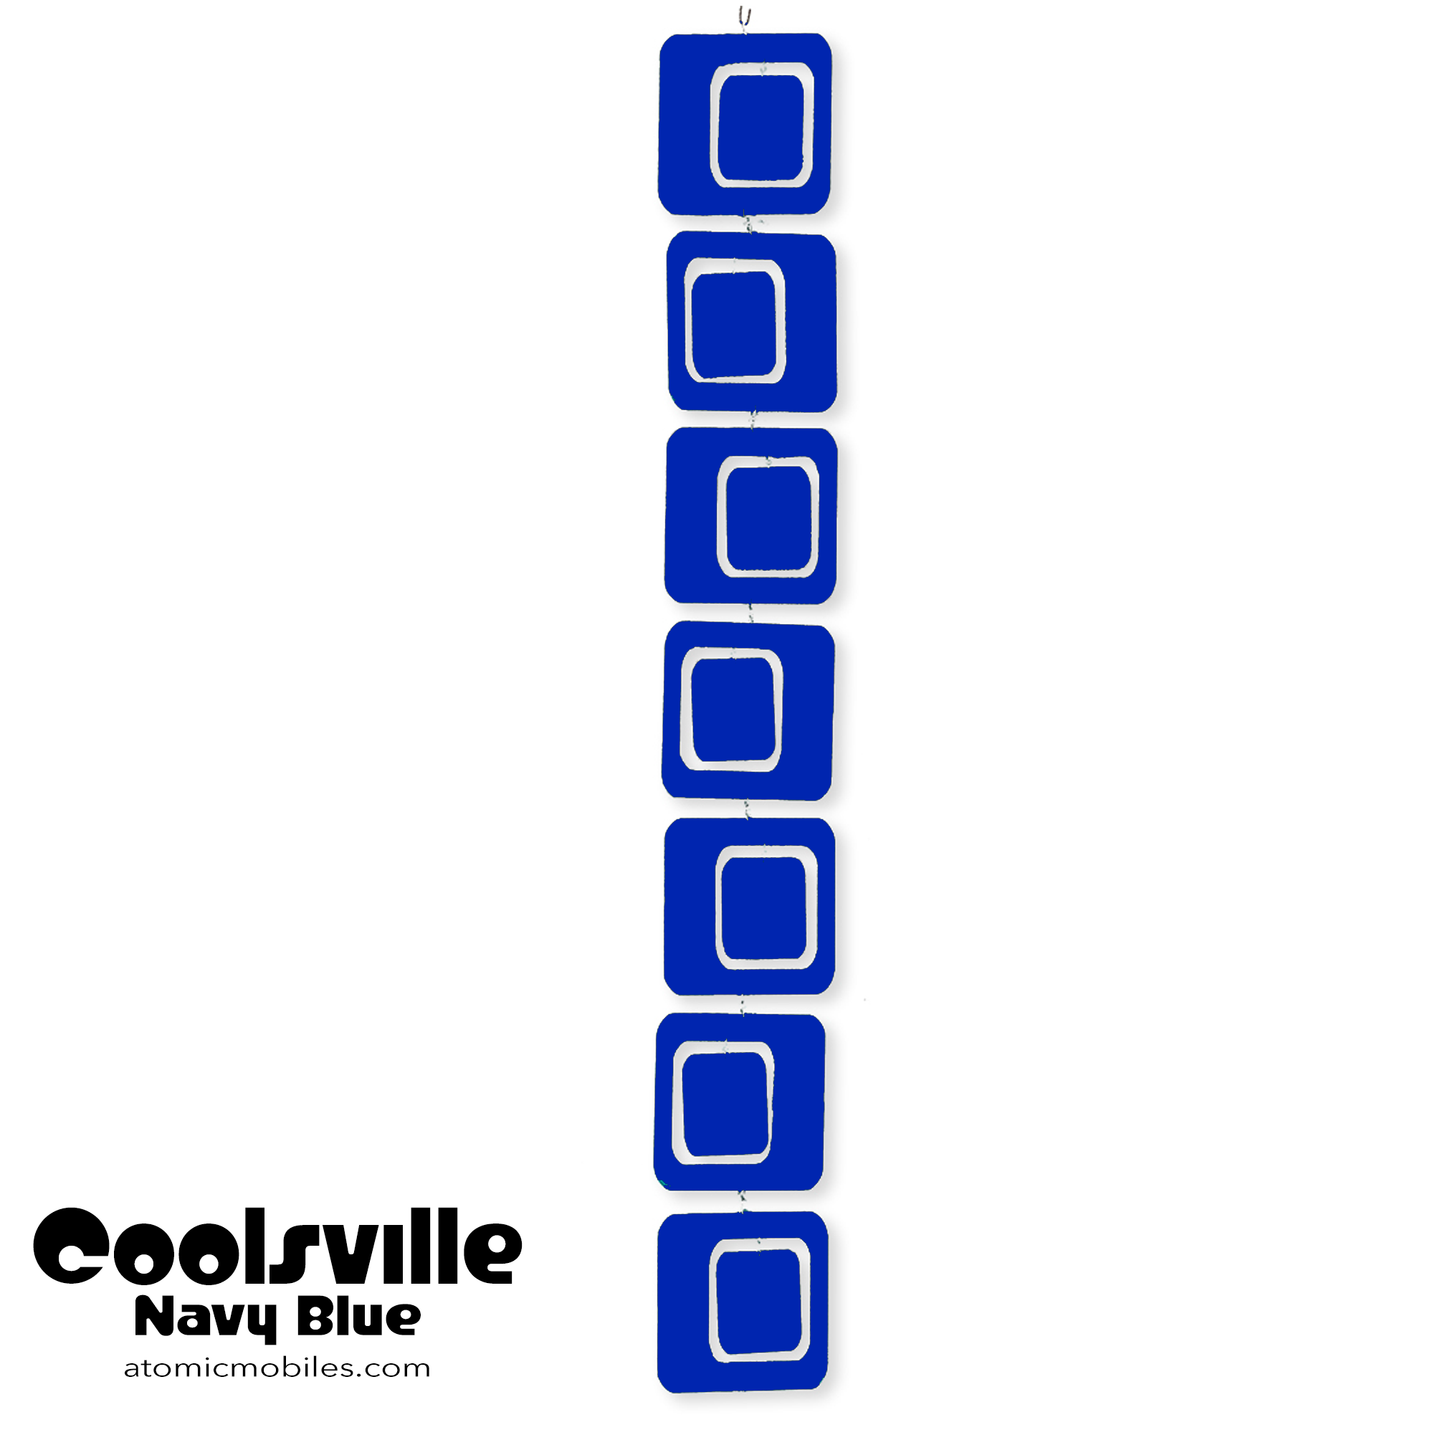 Coolsville kinetic vertical hanging art mobile in Navy Blue by AtomicMobiles.com